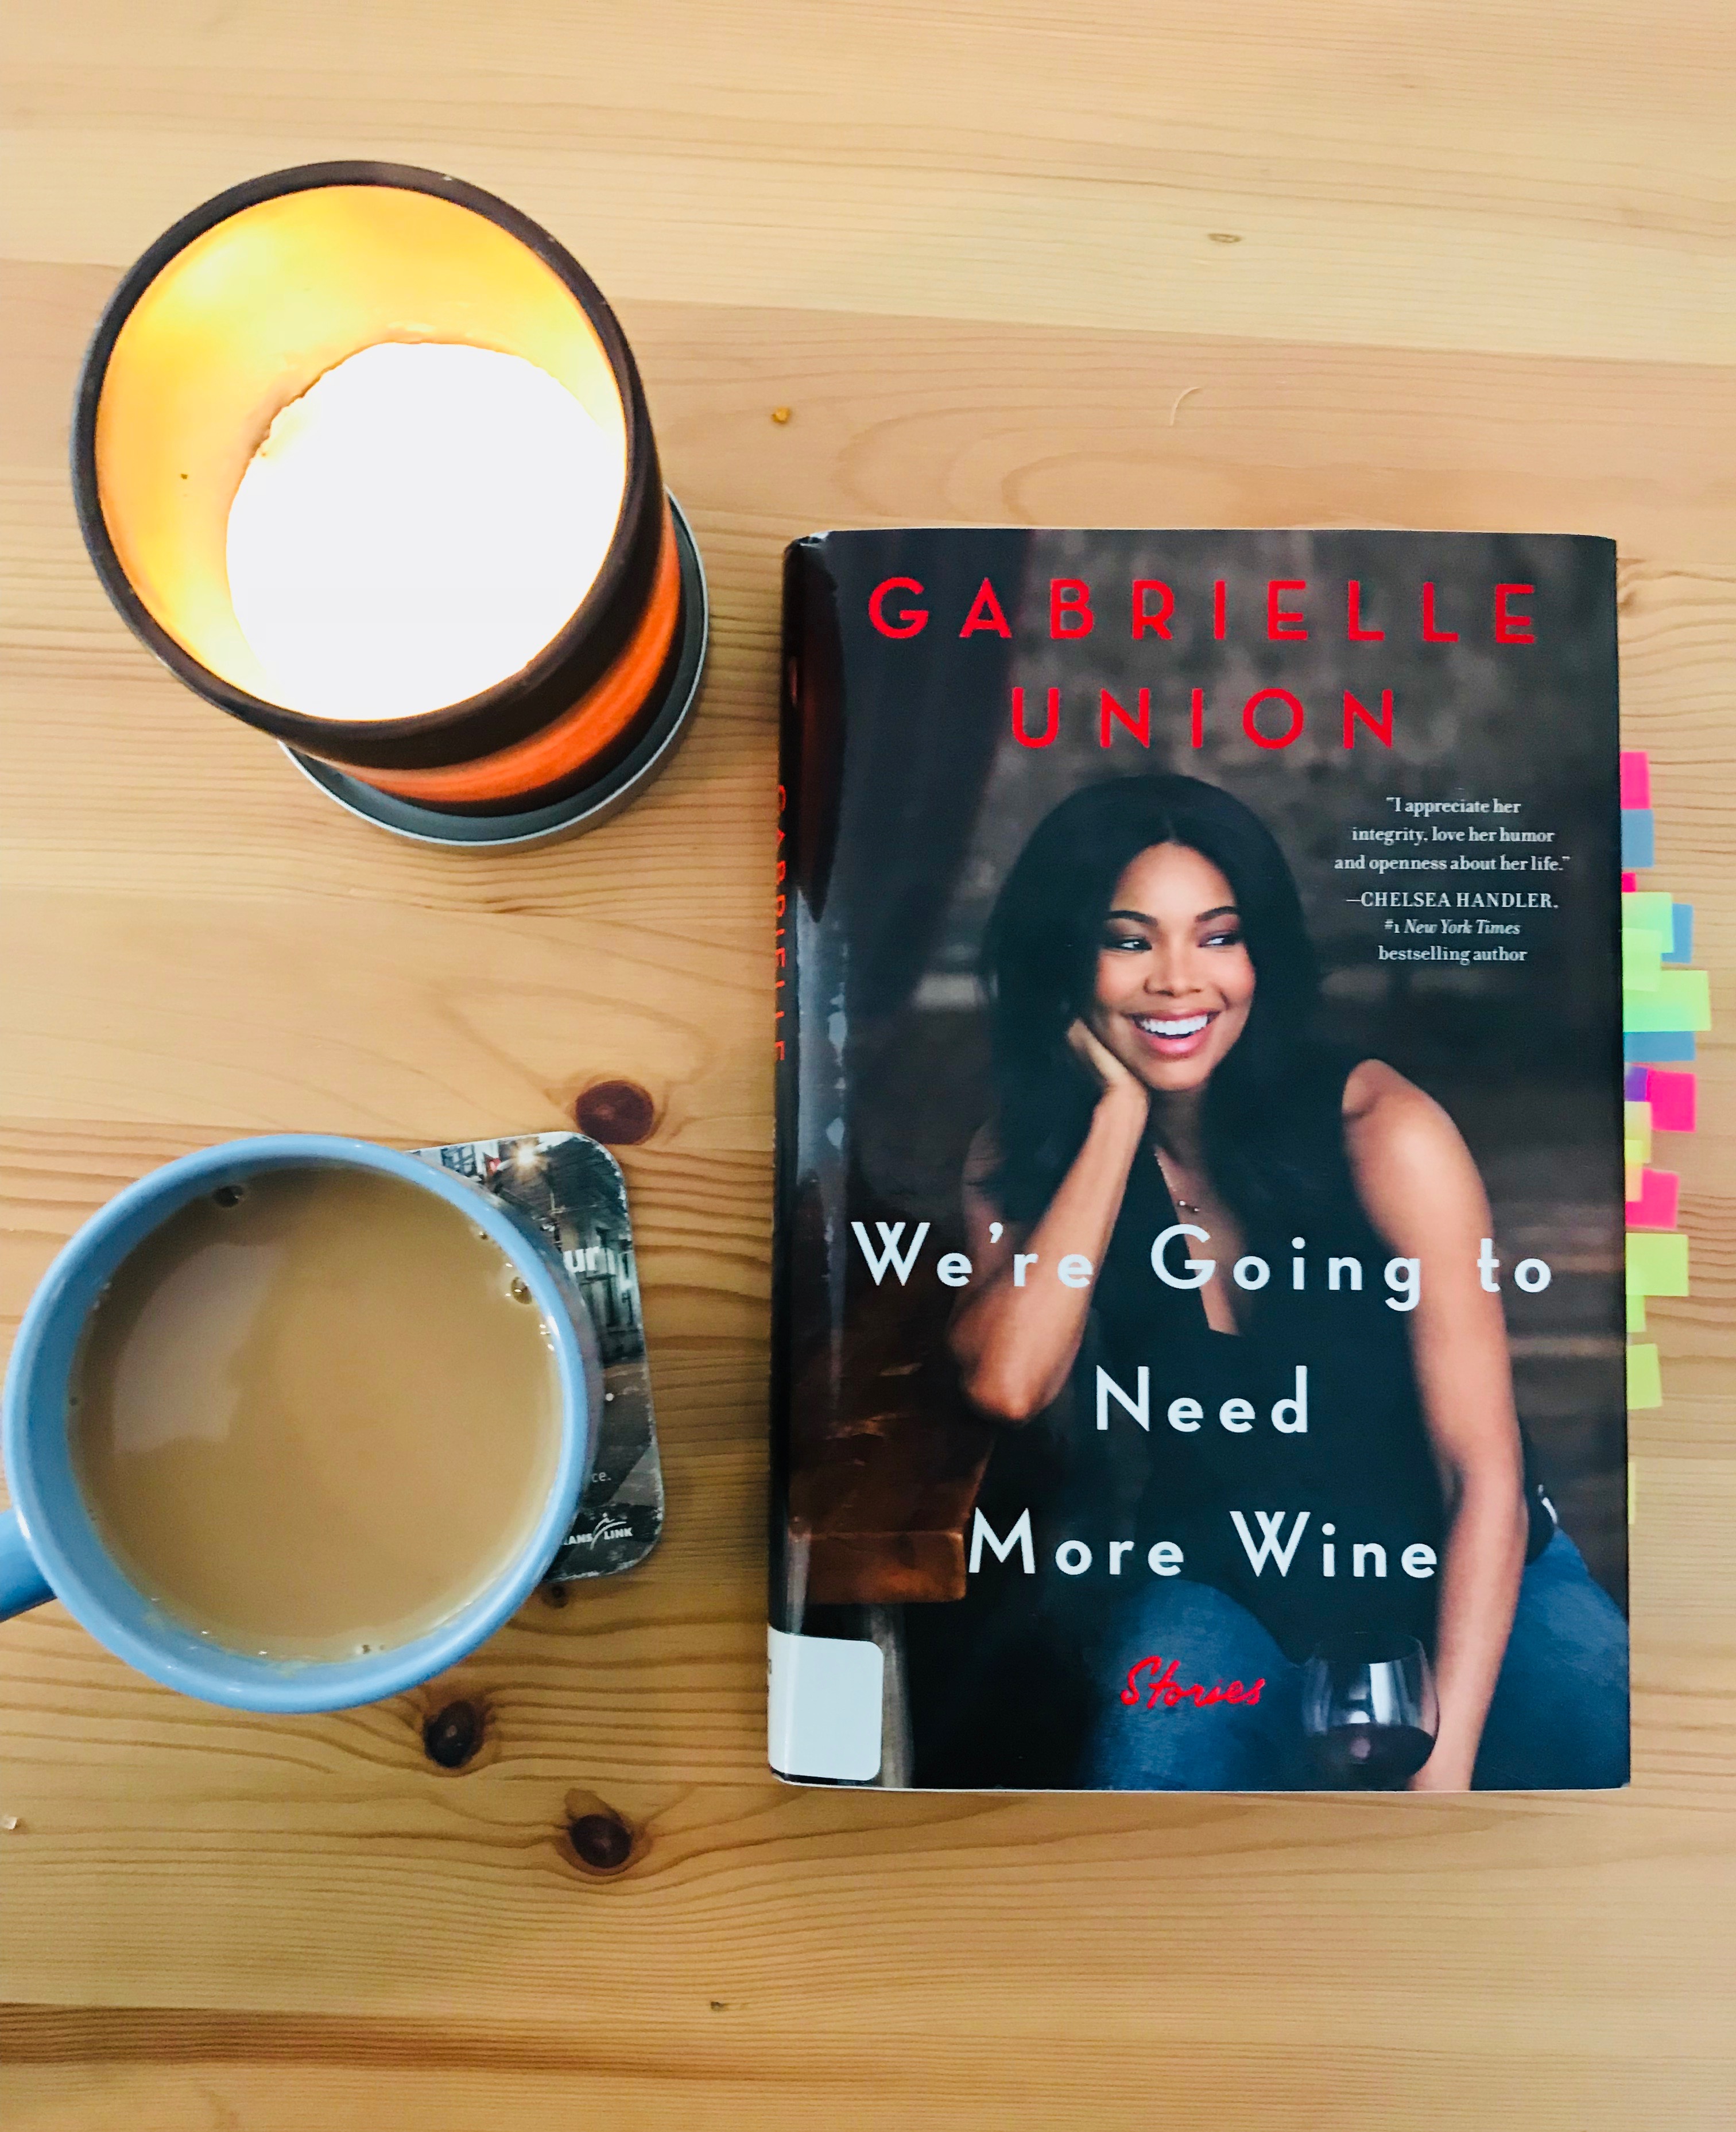 We're Going to Need More Wine' - Gabrielle Union